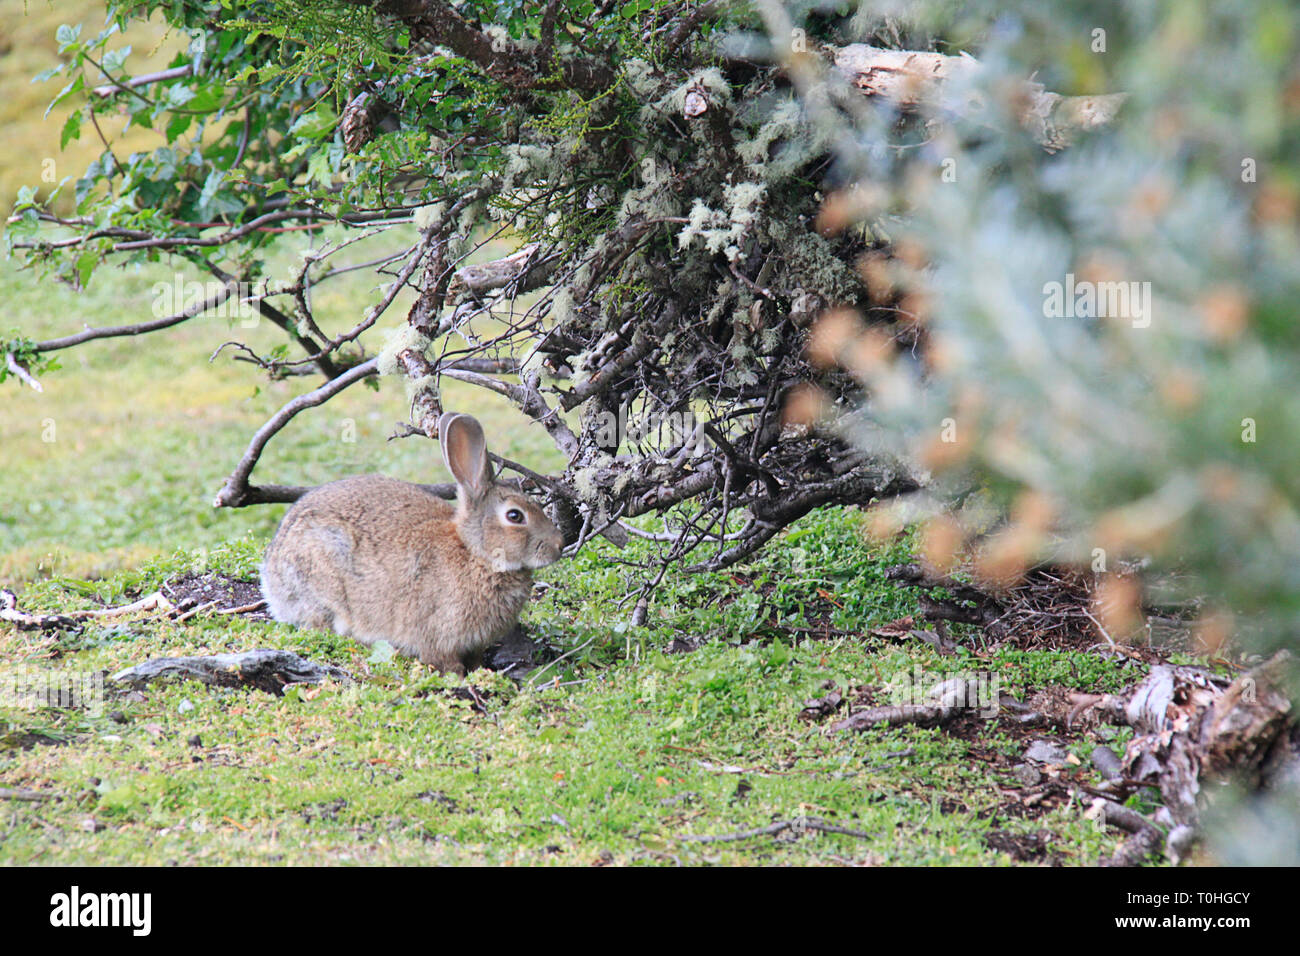 Native from southwestern europe, this rabbit was introduced into several environments and places. Here, in Patagonia, is an invasive specie. Stock Photo